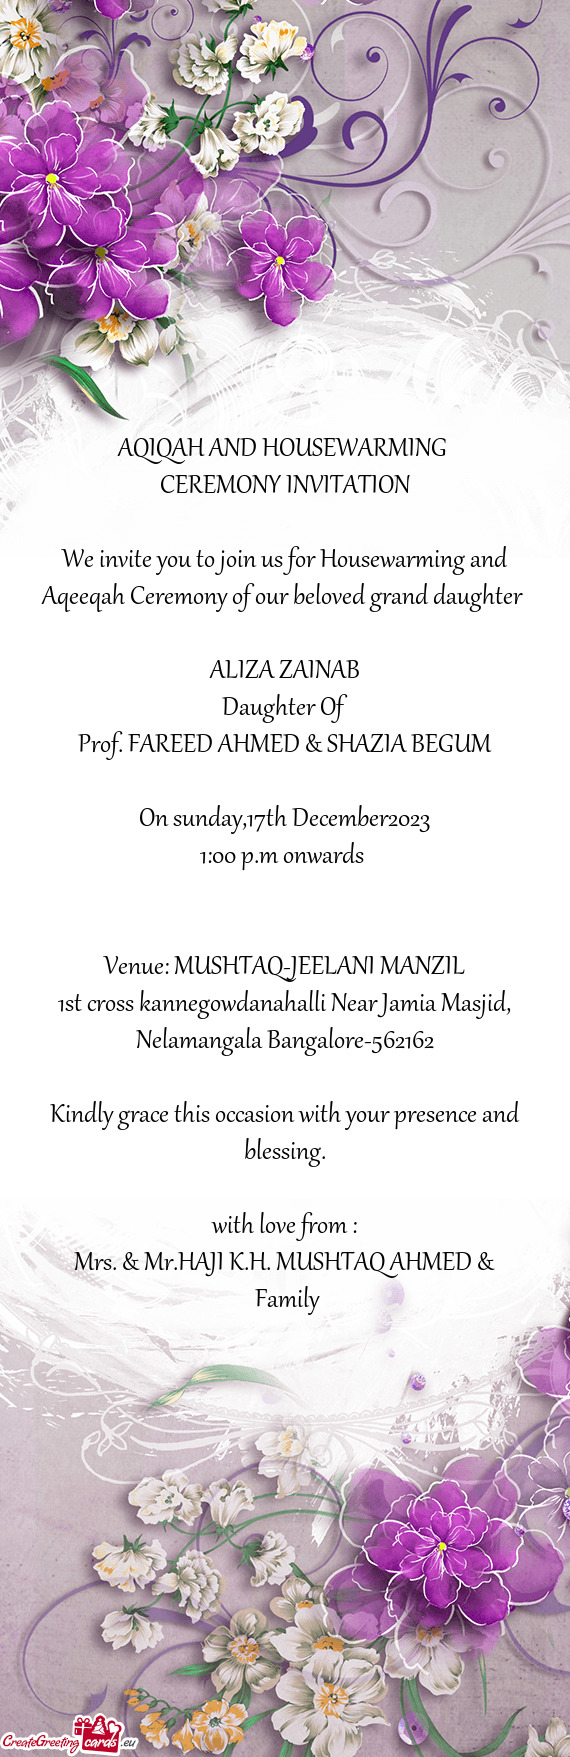 We invite you to join us for Housewarming and Aqeeqah Ceremony of our beloved grand daughter